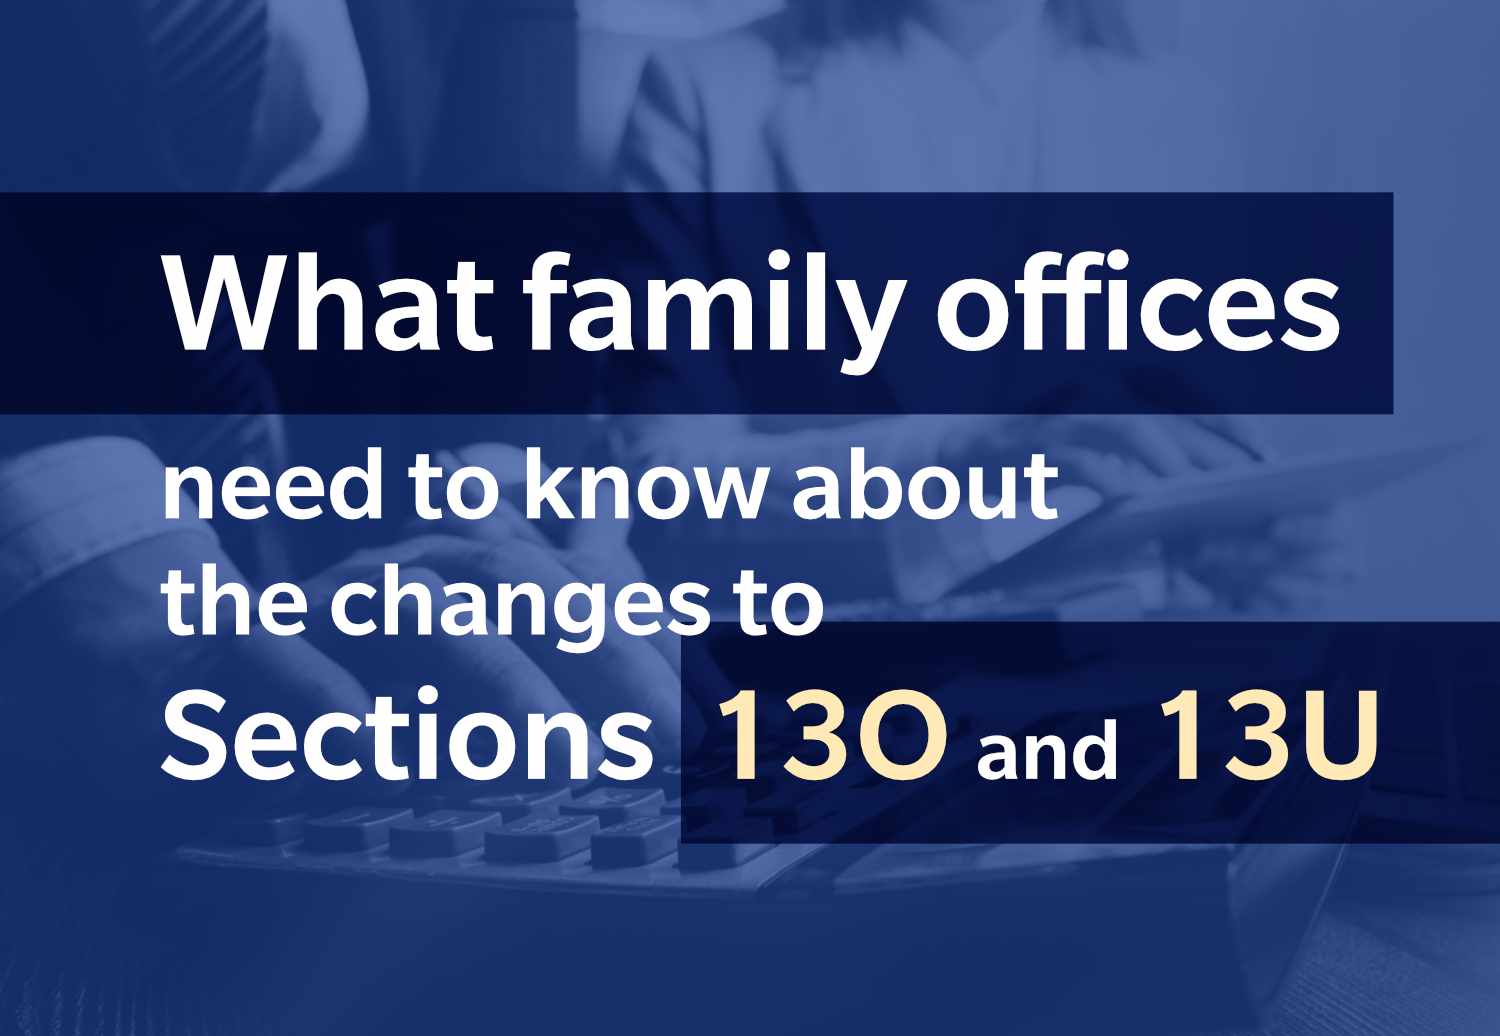 Text reading "What family offices need to know about the changes to Sections 13O and 13U" over a background image of a person using a calculator and another person holding a document.